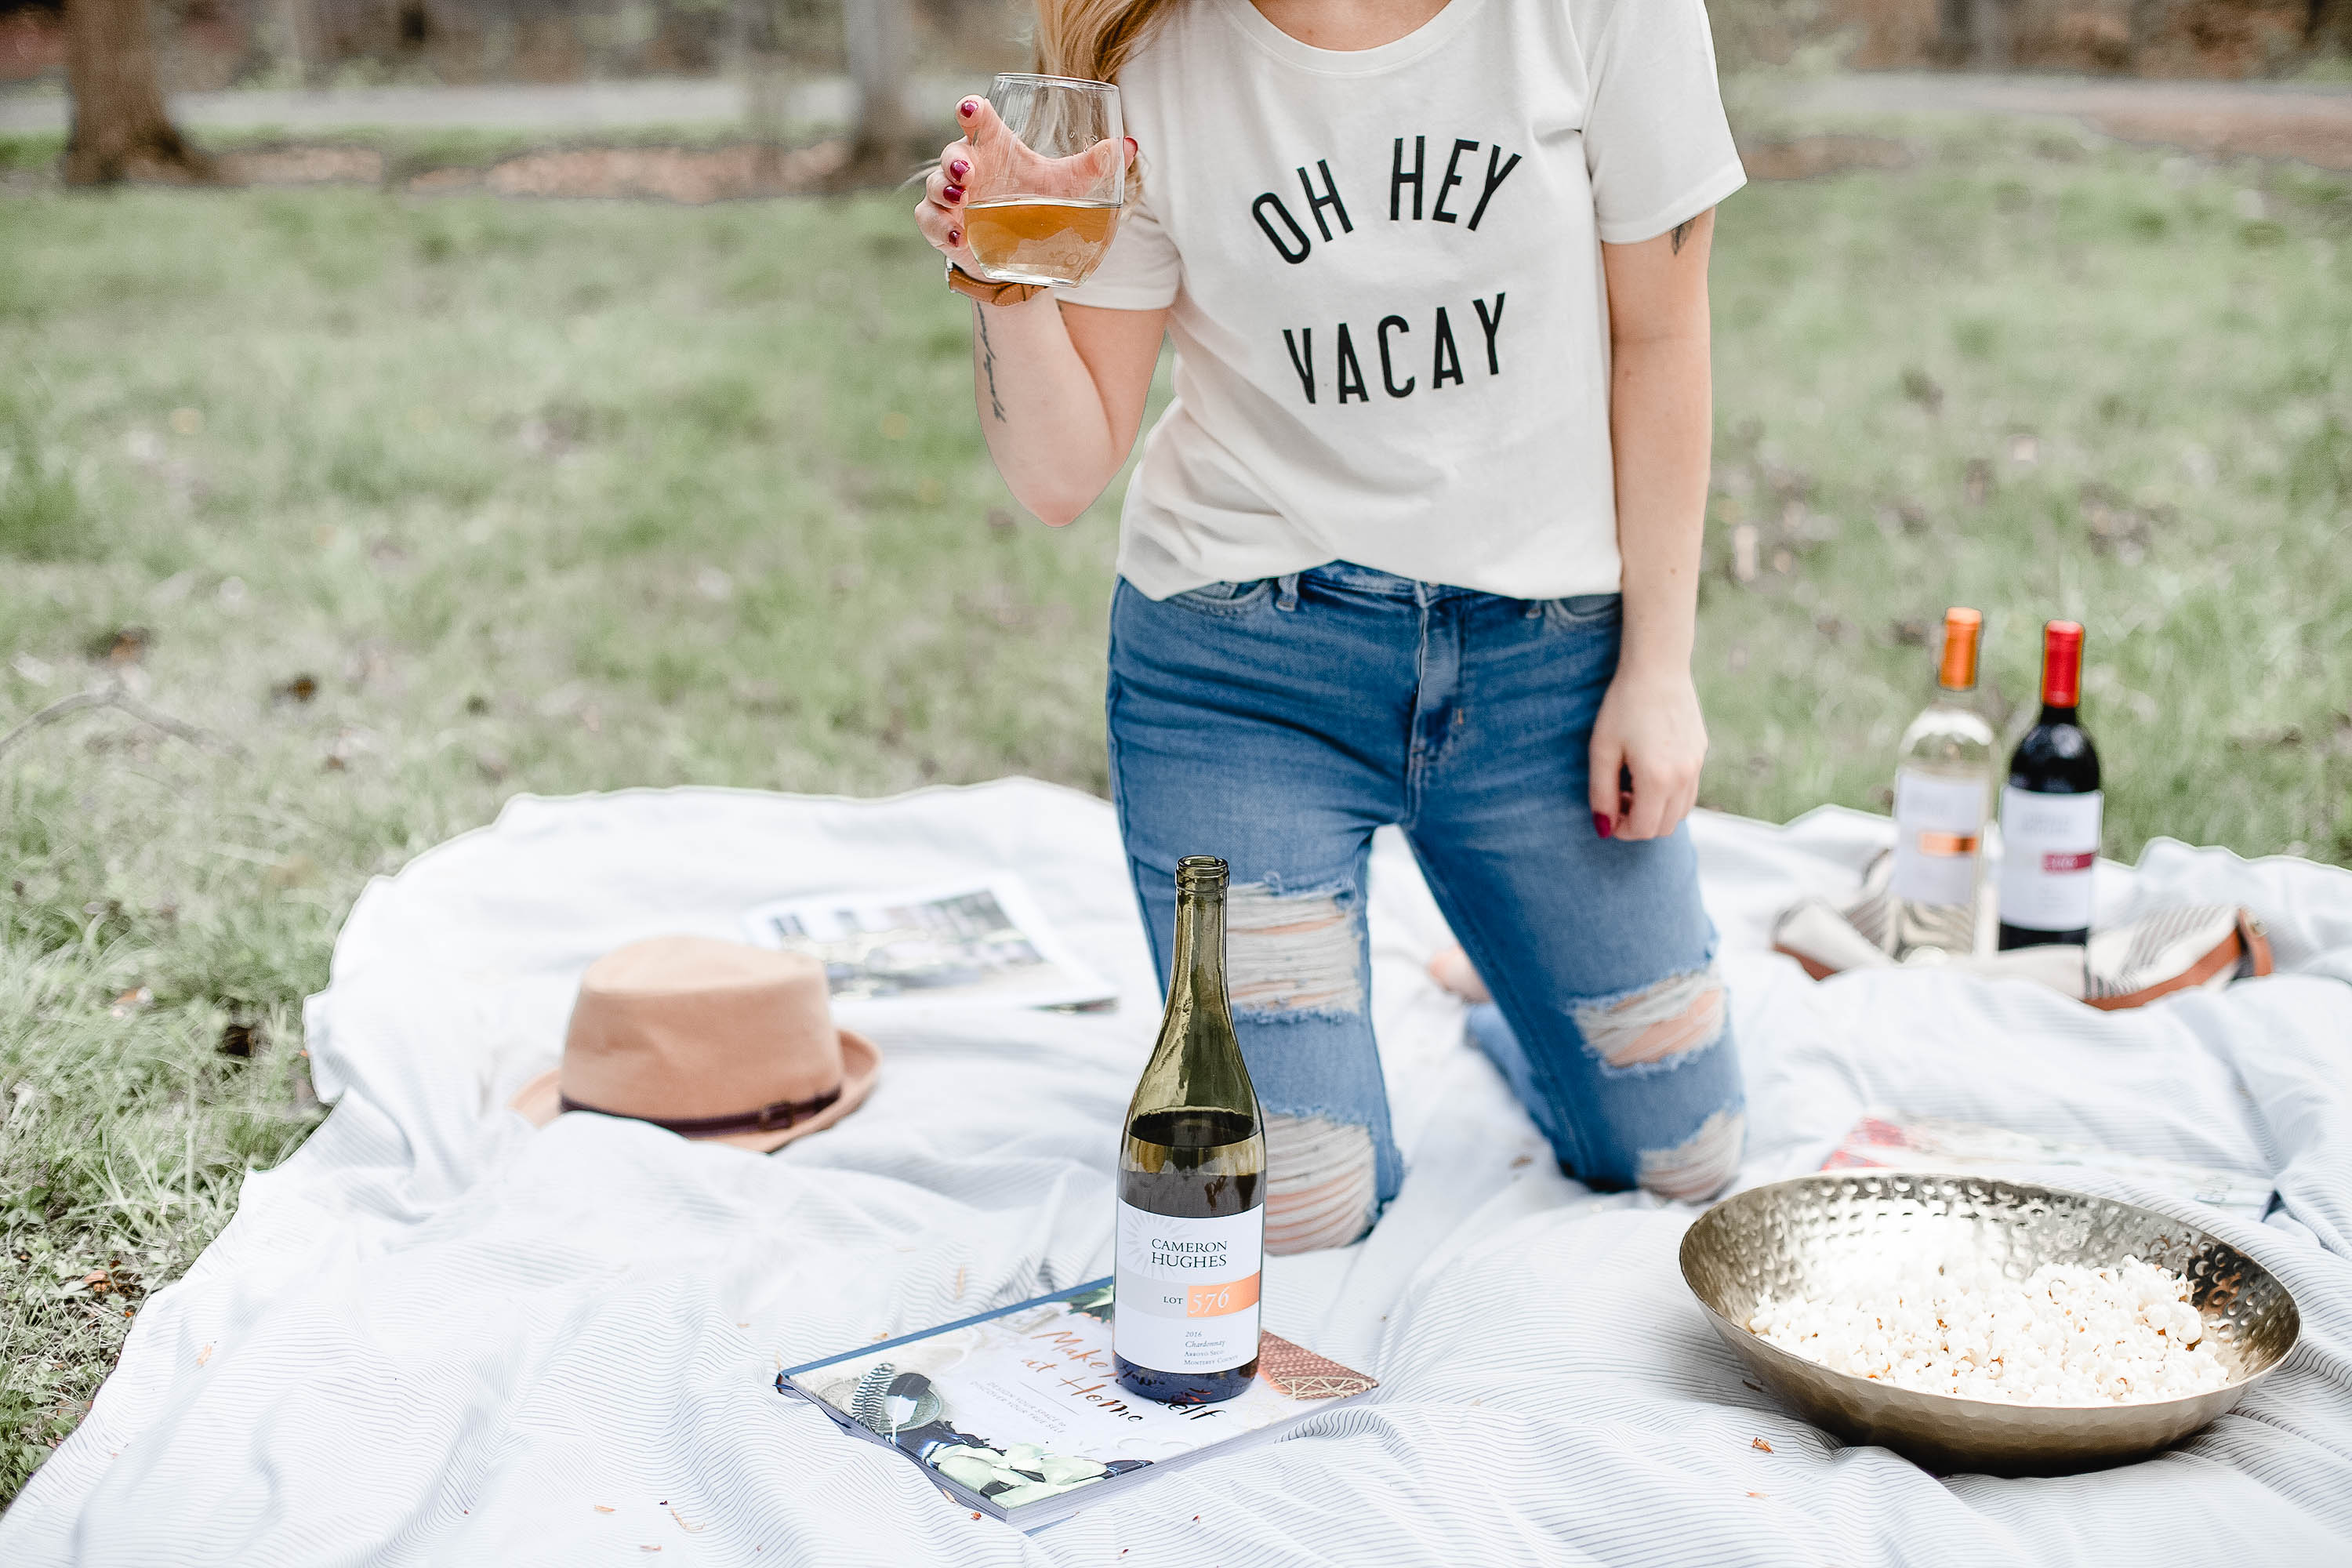 Girl on picnic blanket with Rose wine and Oh Hey Vacay T-Shirt